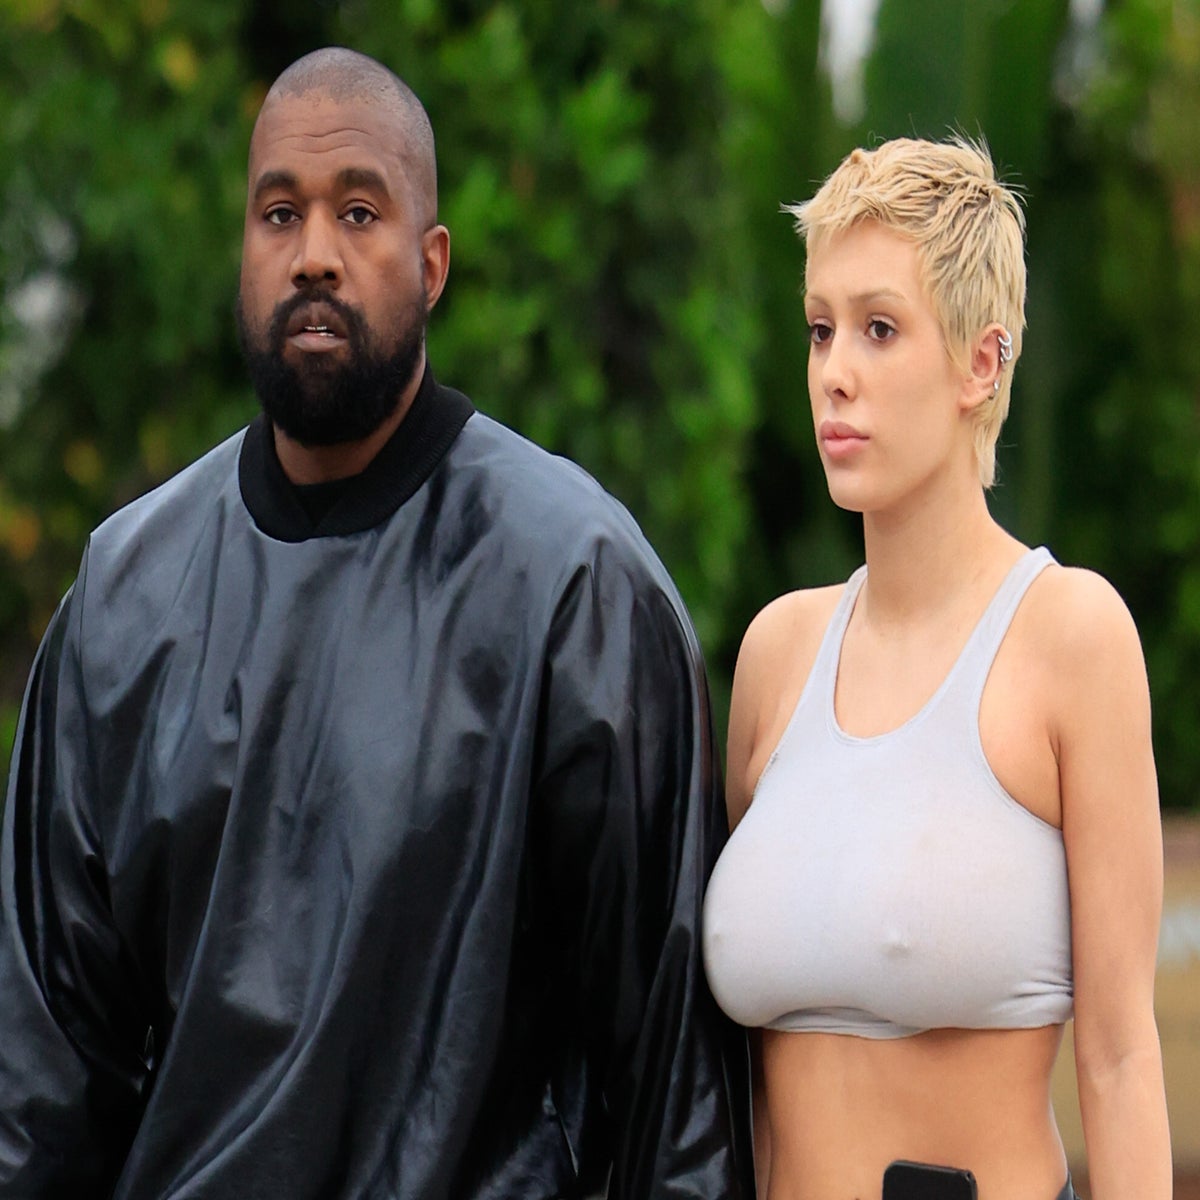 Bianca Censori risks prison after near-naked outing in Paris with Kanye West